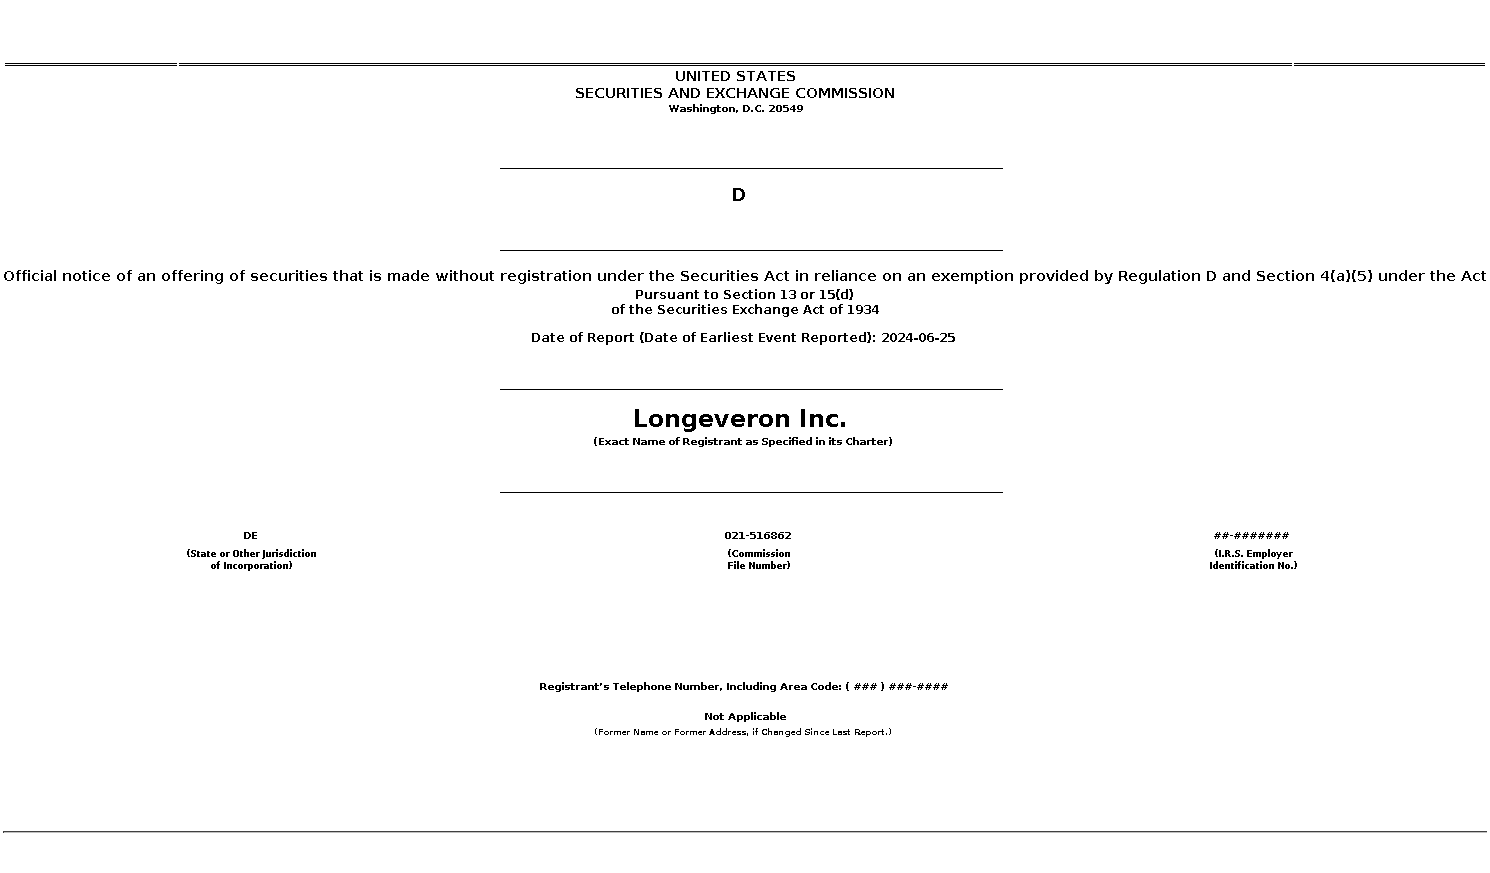 LGVN : D Official notice of an offering of securities that is made without registration under the Securities Act in reliance on an exemption provided by Regulation D and Section 4(a)(5) under the Act